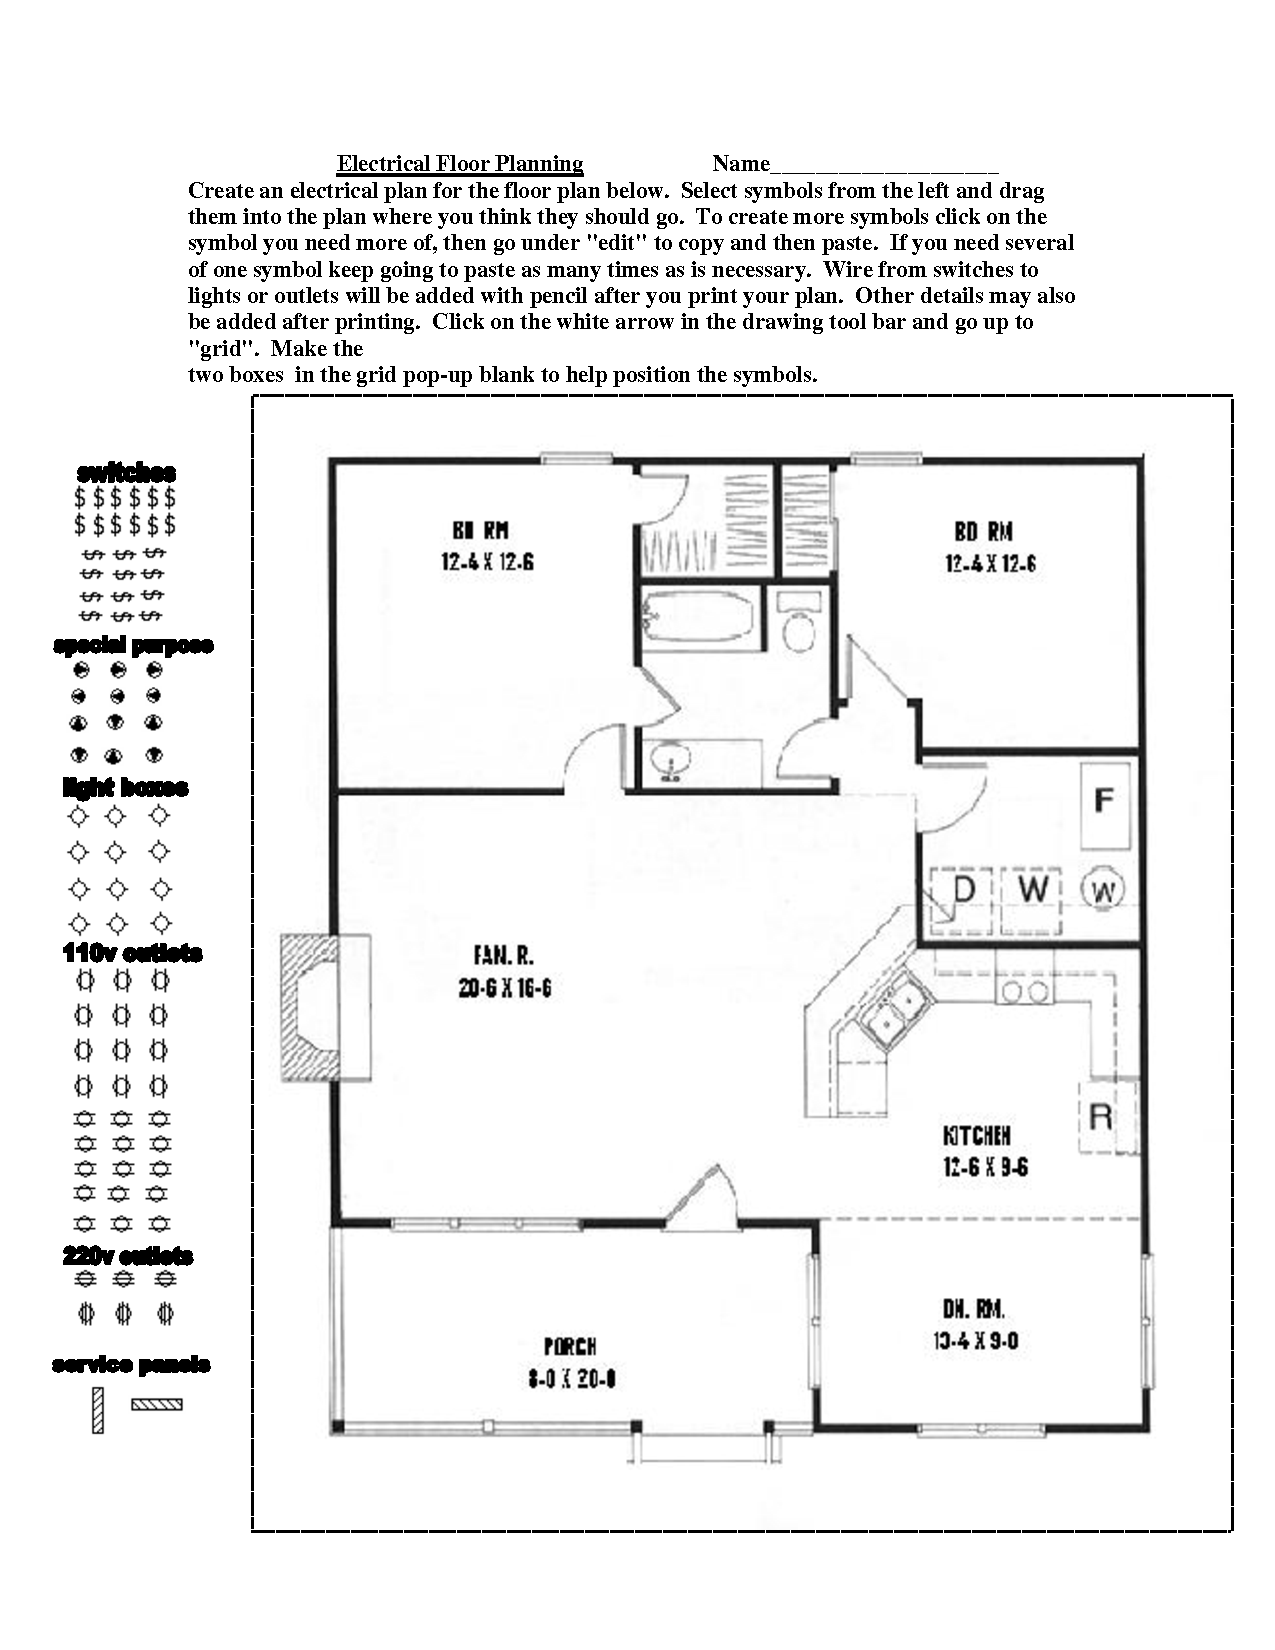 Electrical Floor Planning By Hcj